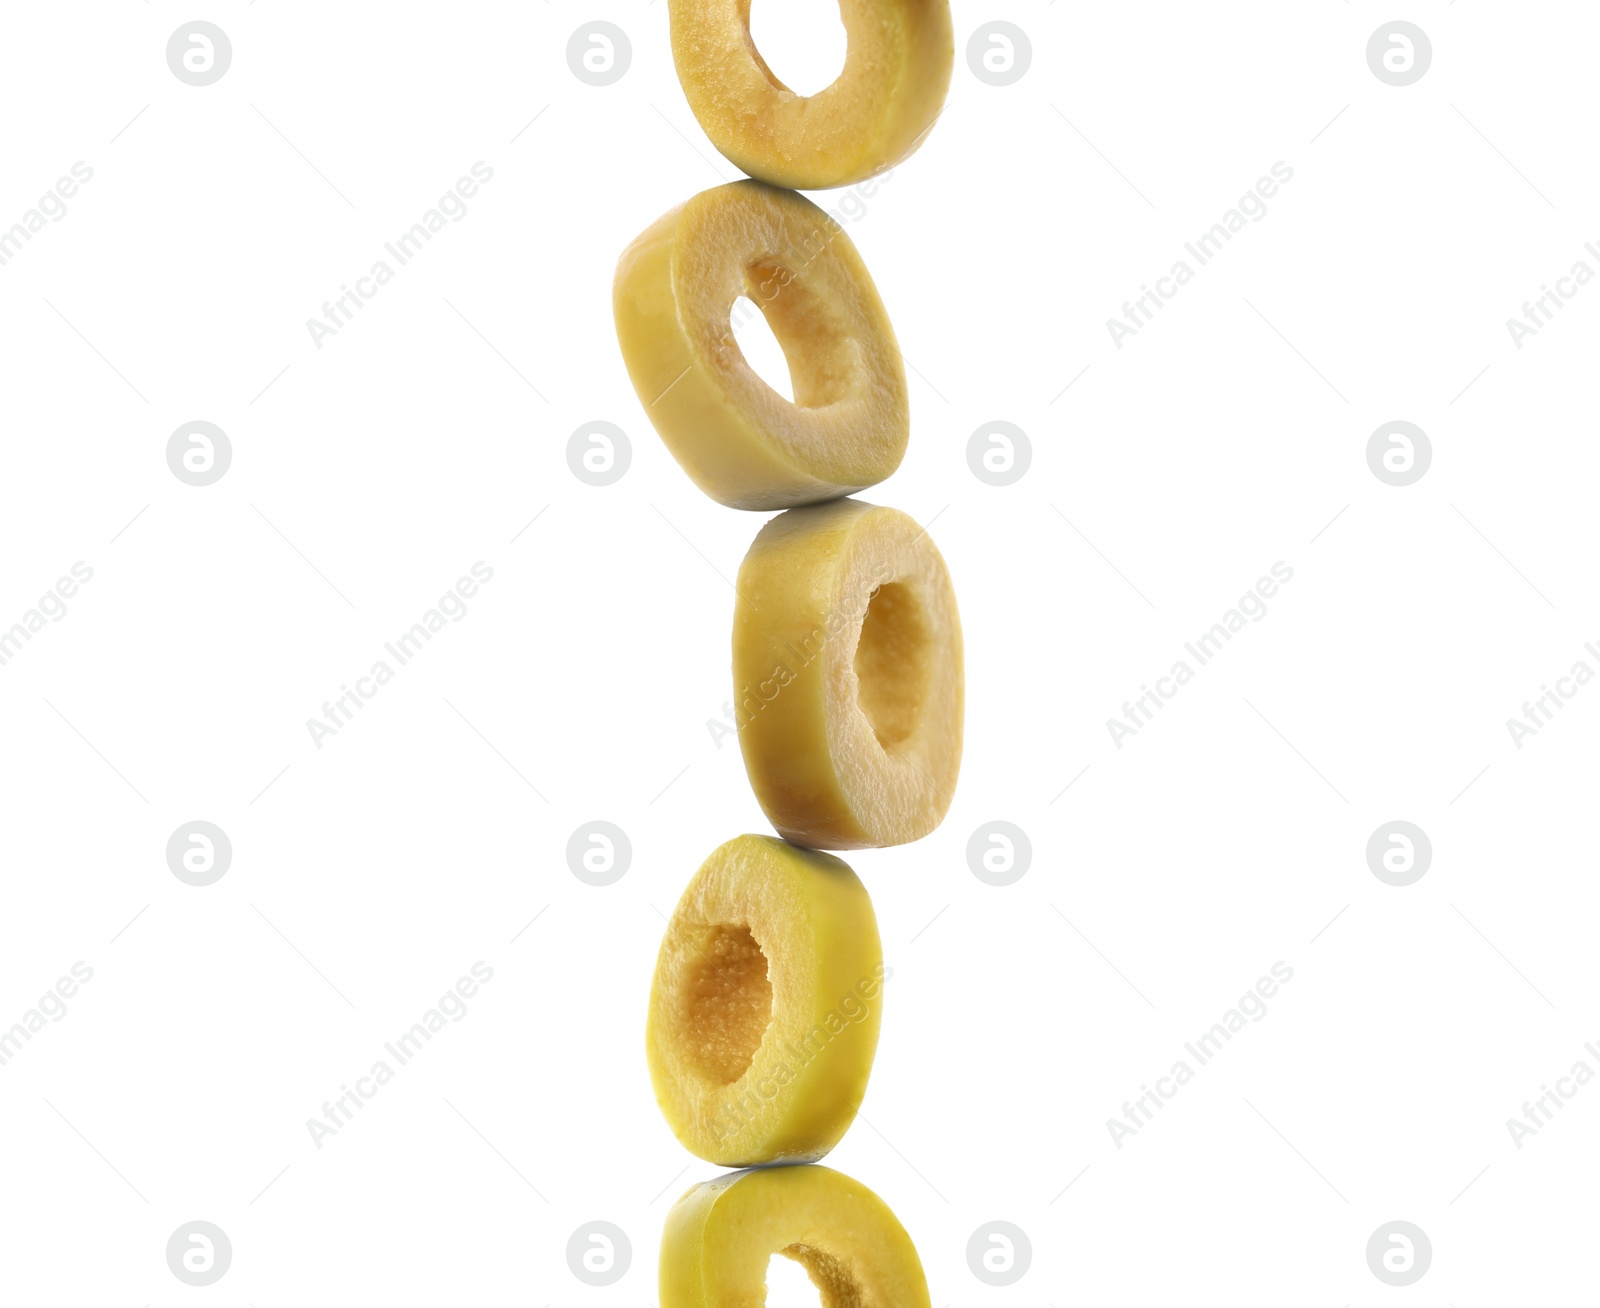 Image of Stacked slices of green olive on white background